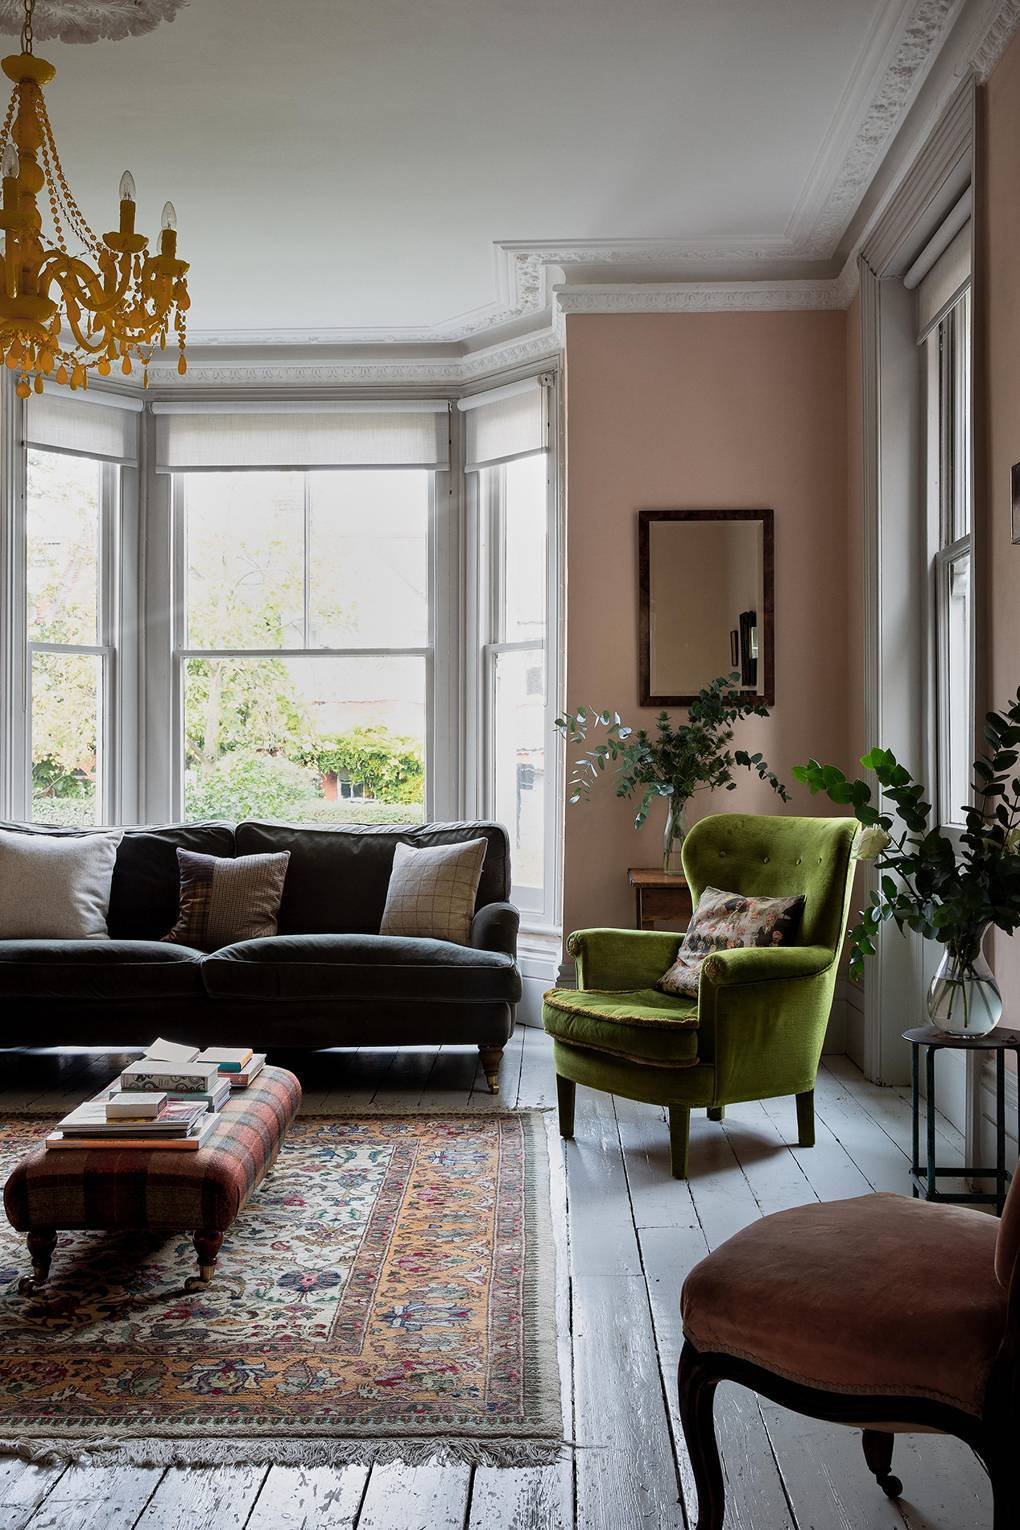  interior style, style, Victorian house, Victorian, London, inspiration, house, Mixing soft furnishing colours and styles, soft furnishings, rustic floorboards, built in bookcase, different size artworks, living room, large green vintage windows and 